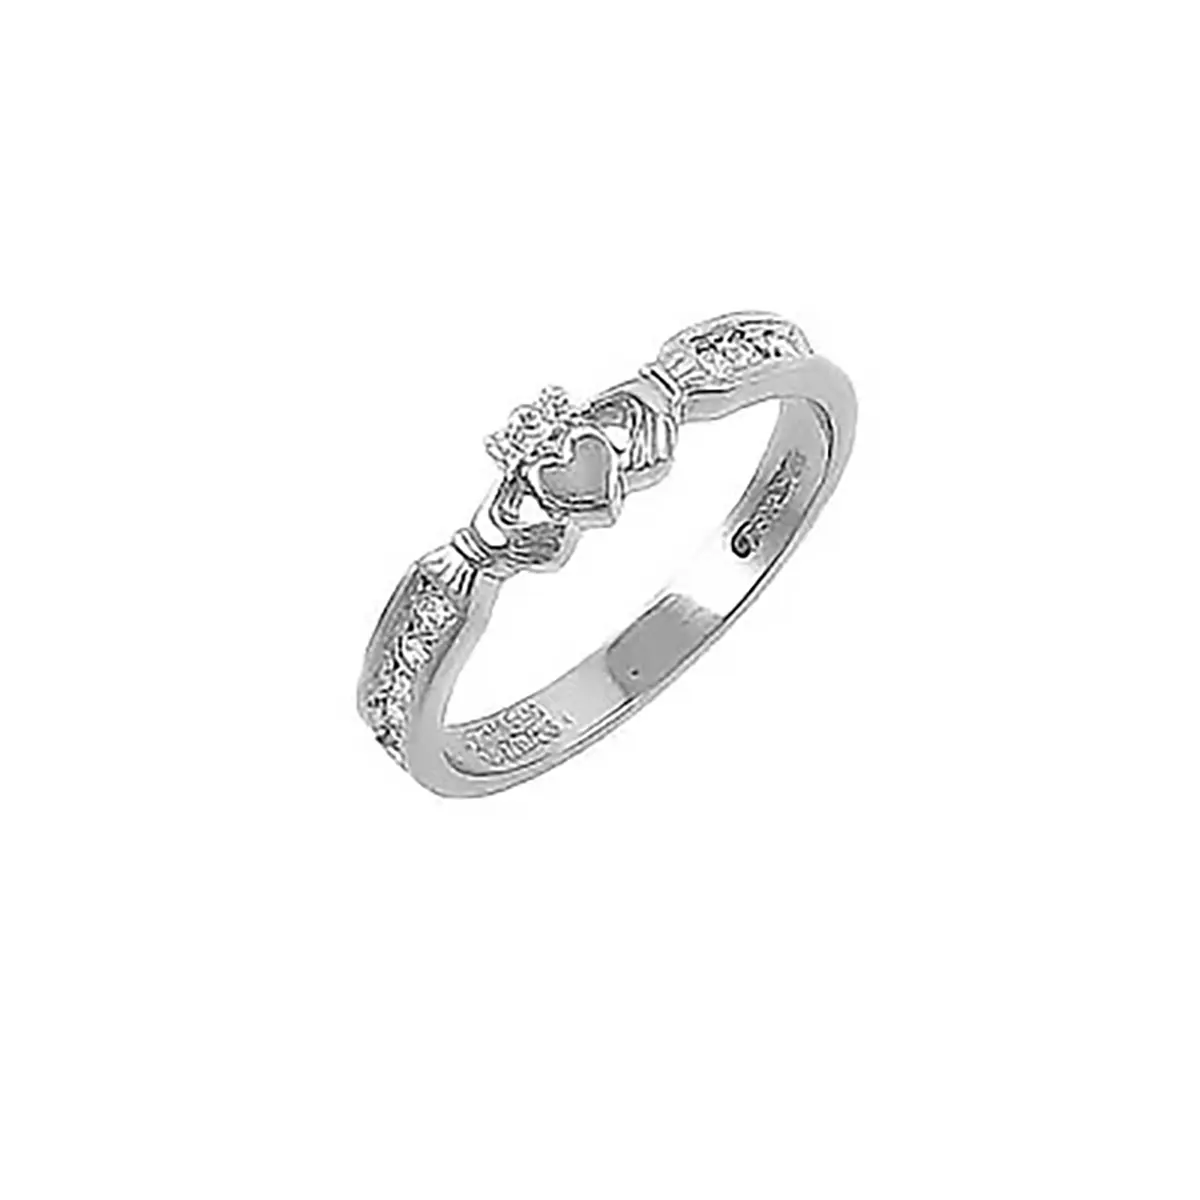 Claddagh Ring In White Gold With Brilliant Cut Diamonds...